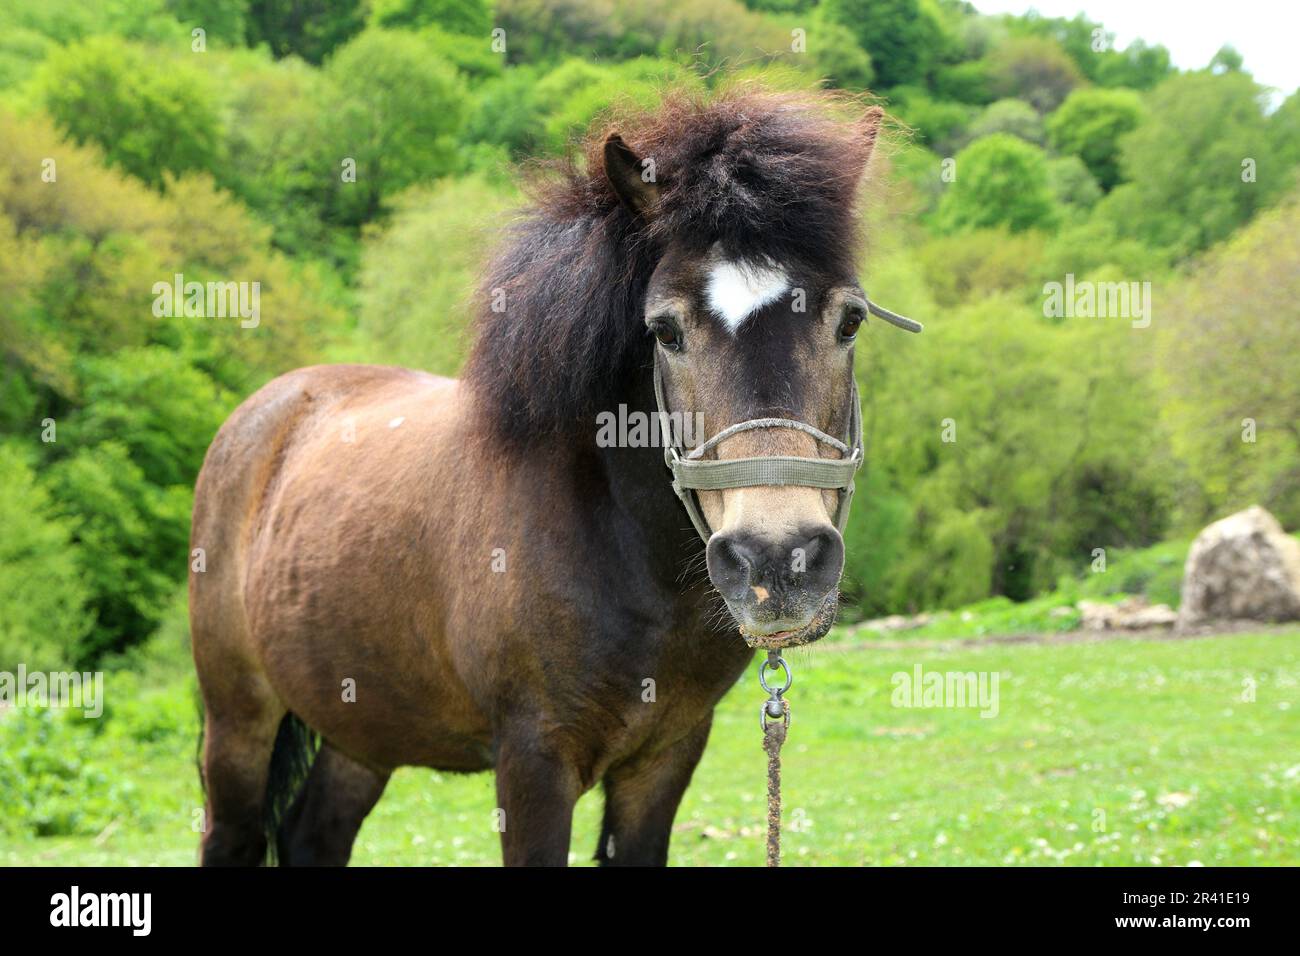 A Pony (Horse) seen in a meadow in the Caucasus Mountains on the territory of the Republic of Karachay-Cherkessia, near Honey Waterfalls, in the Russian Federation. Stock Photo